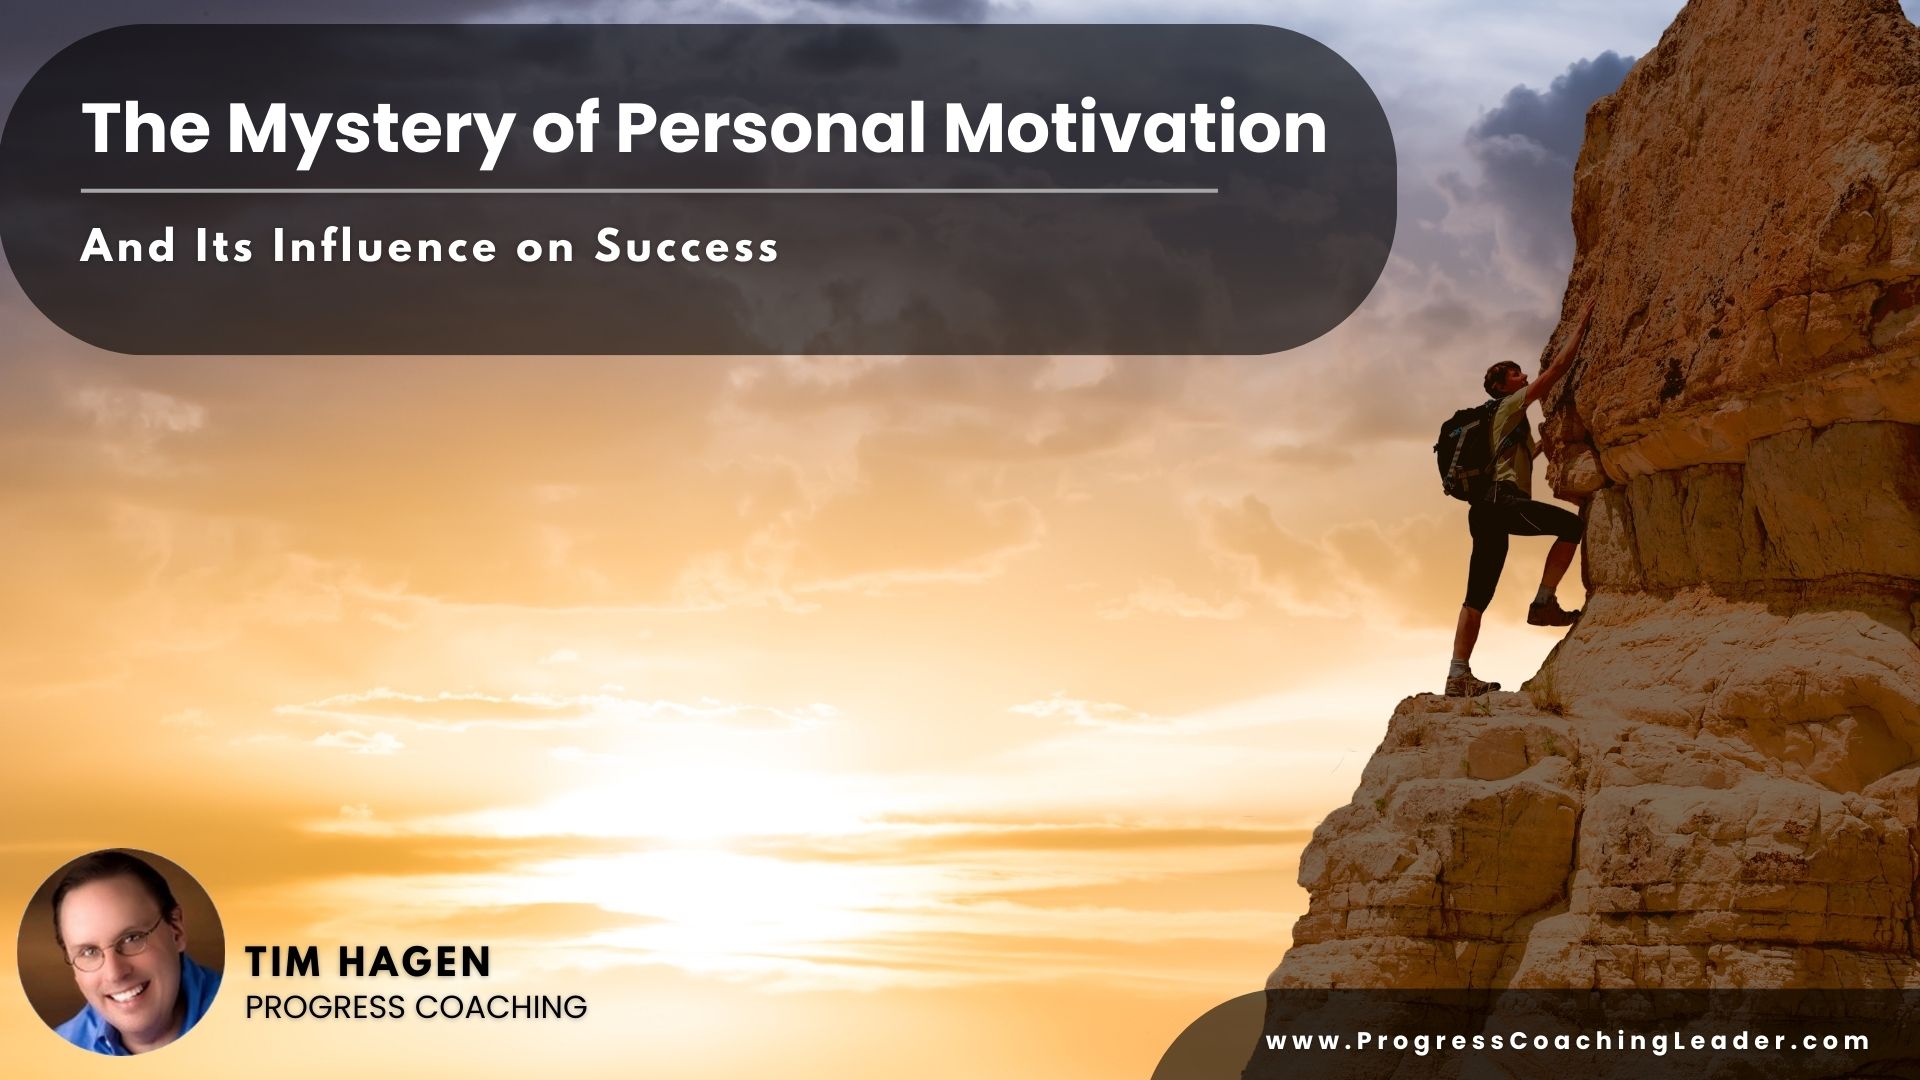 The Mystery of Personal Motivation and Its Influence on Success